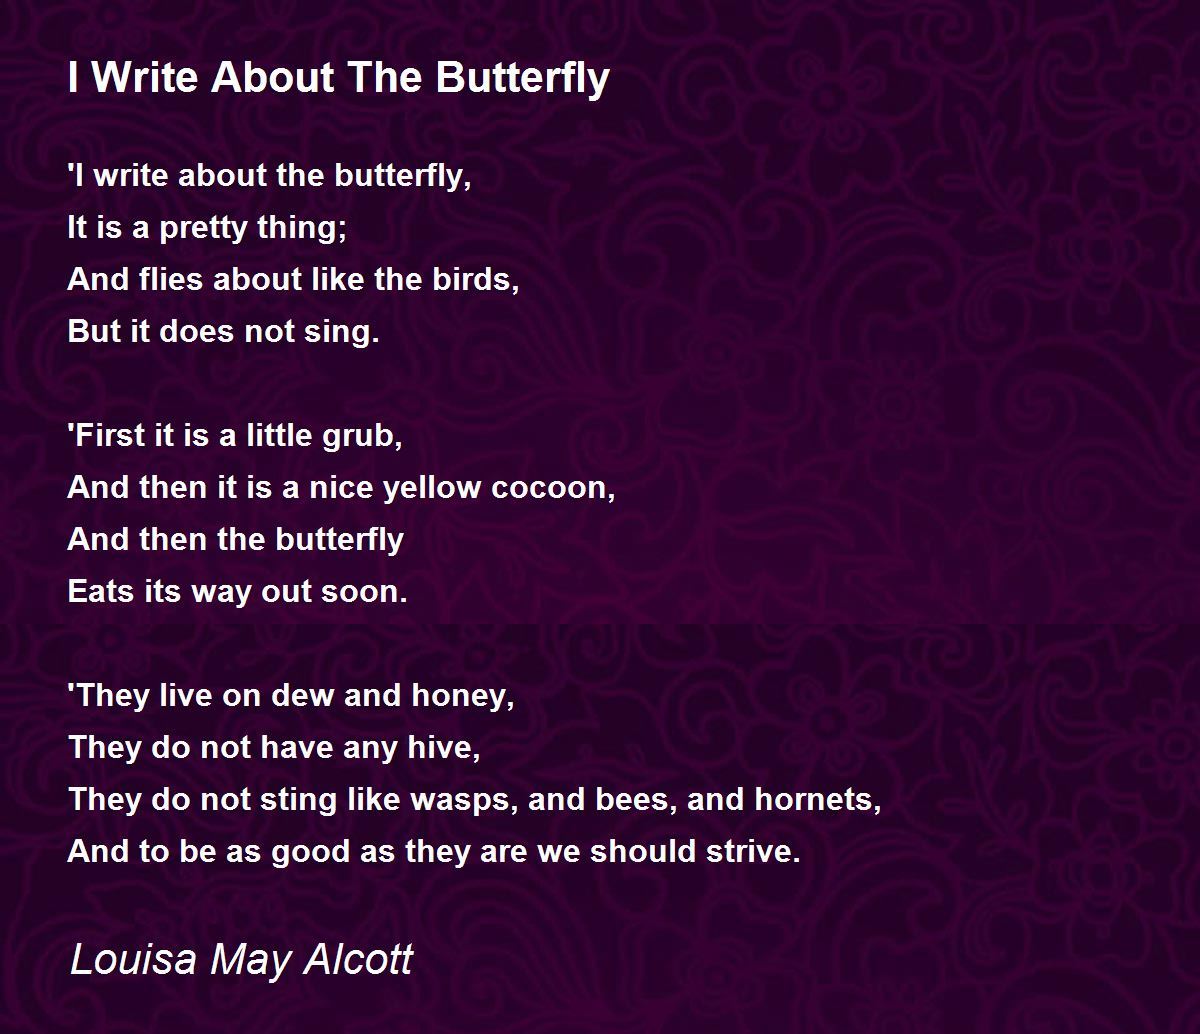 I Write About The Butterfly Poem by Louisa May Alcott - Poem Hunter